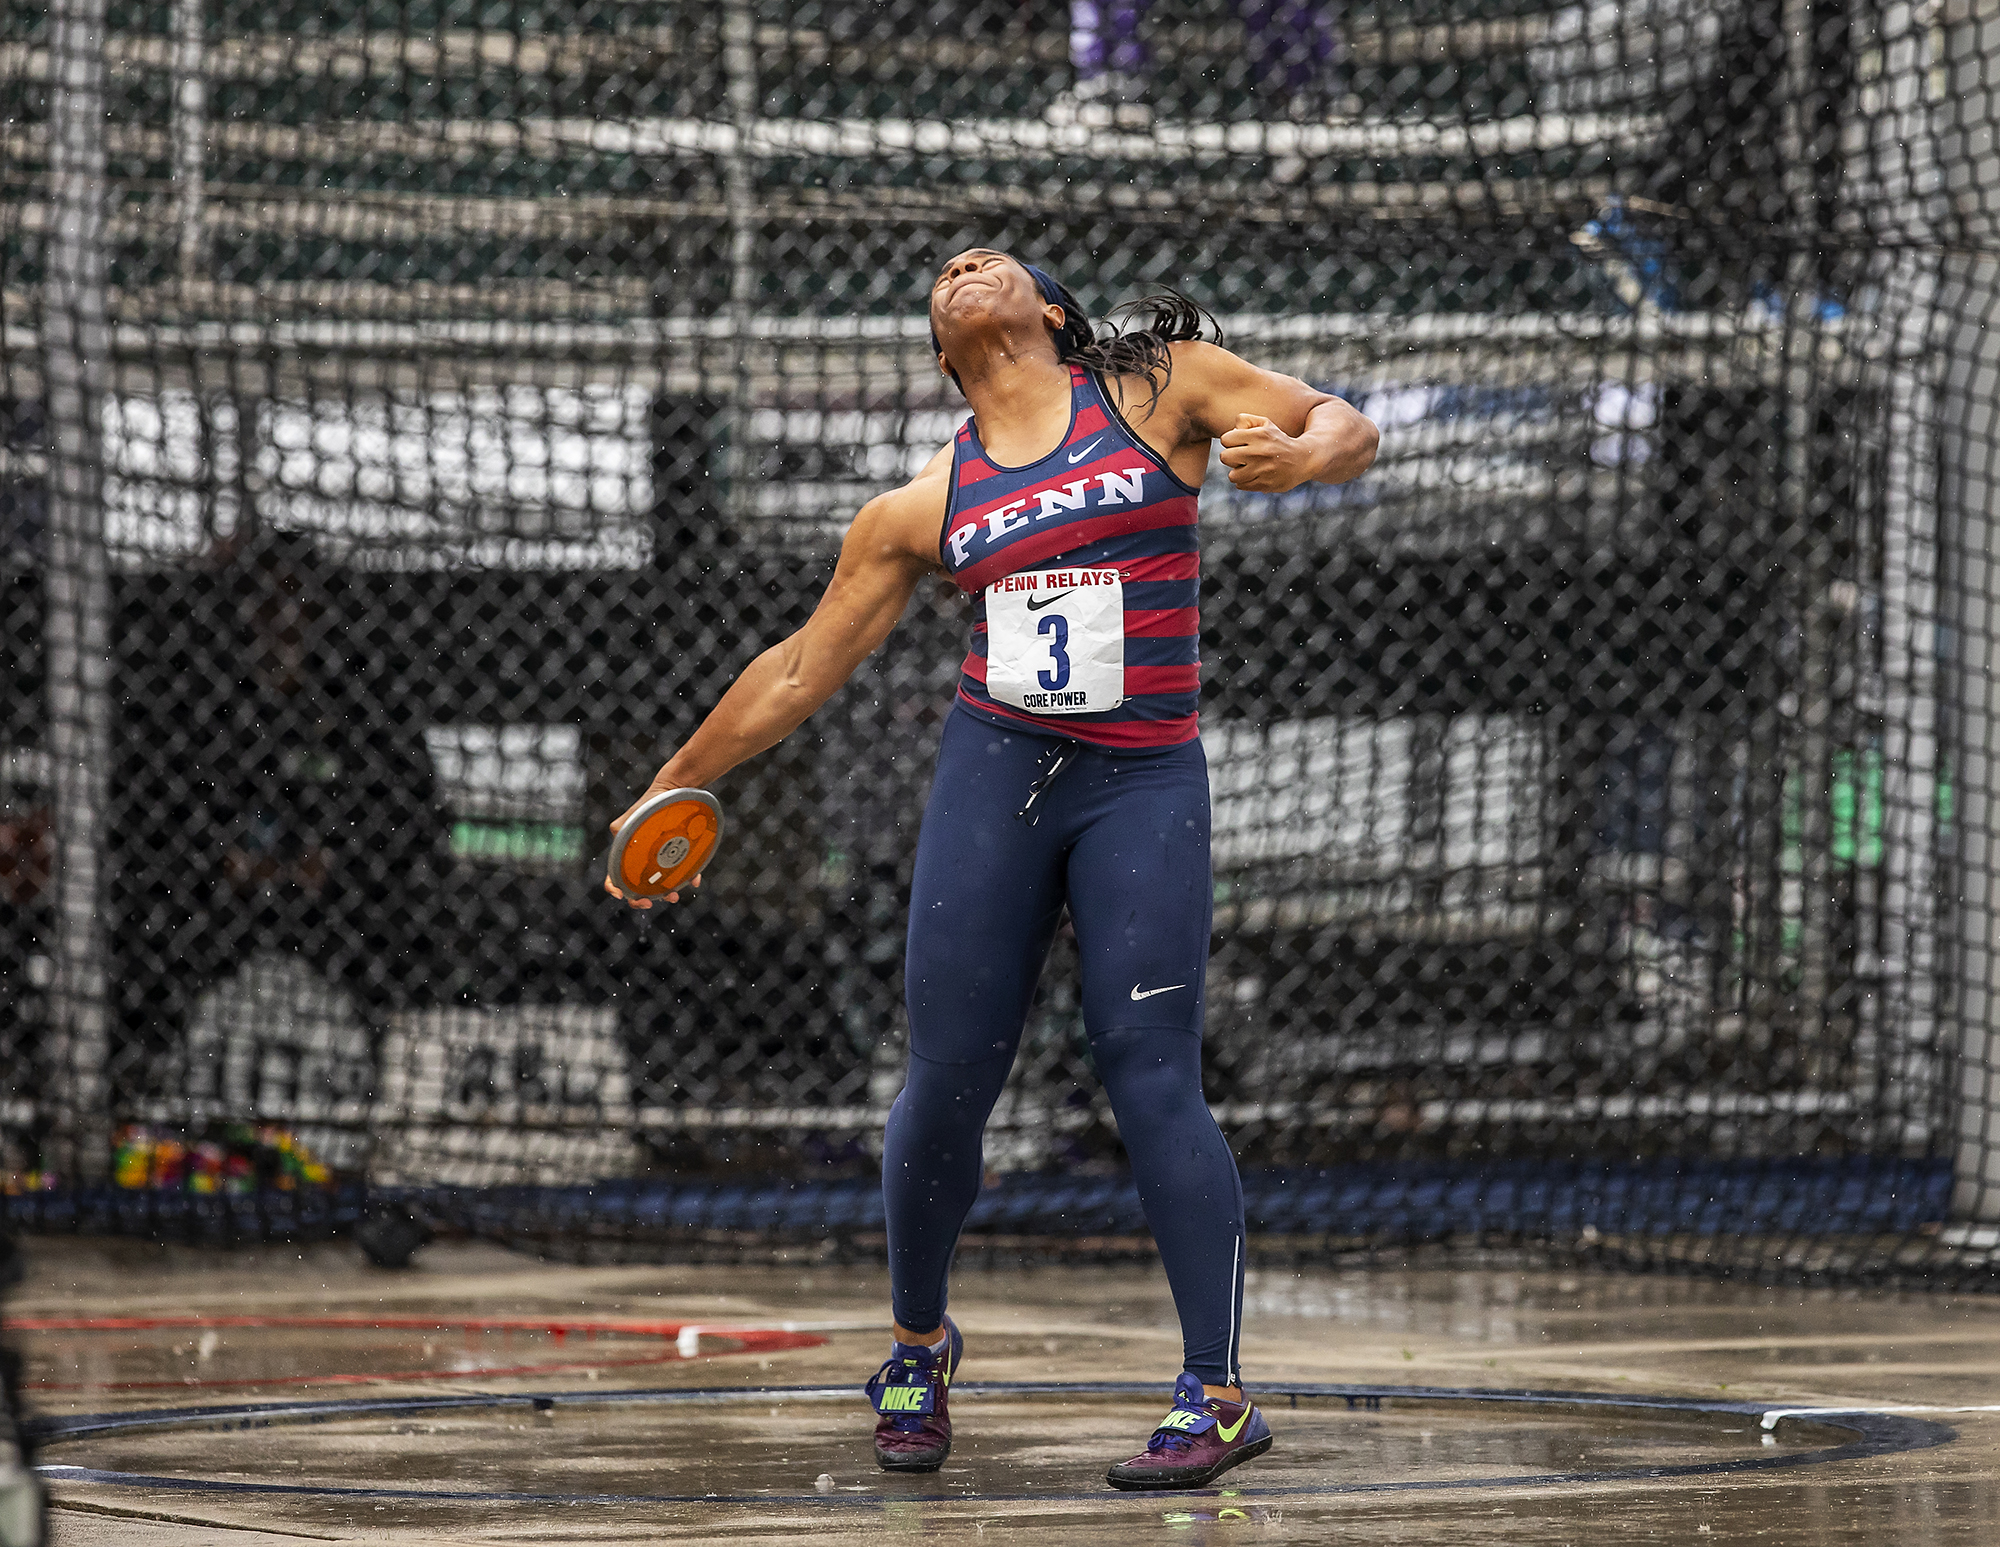 Penn Relays - Ashley Anumba competes in the Women’s Discus Championship